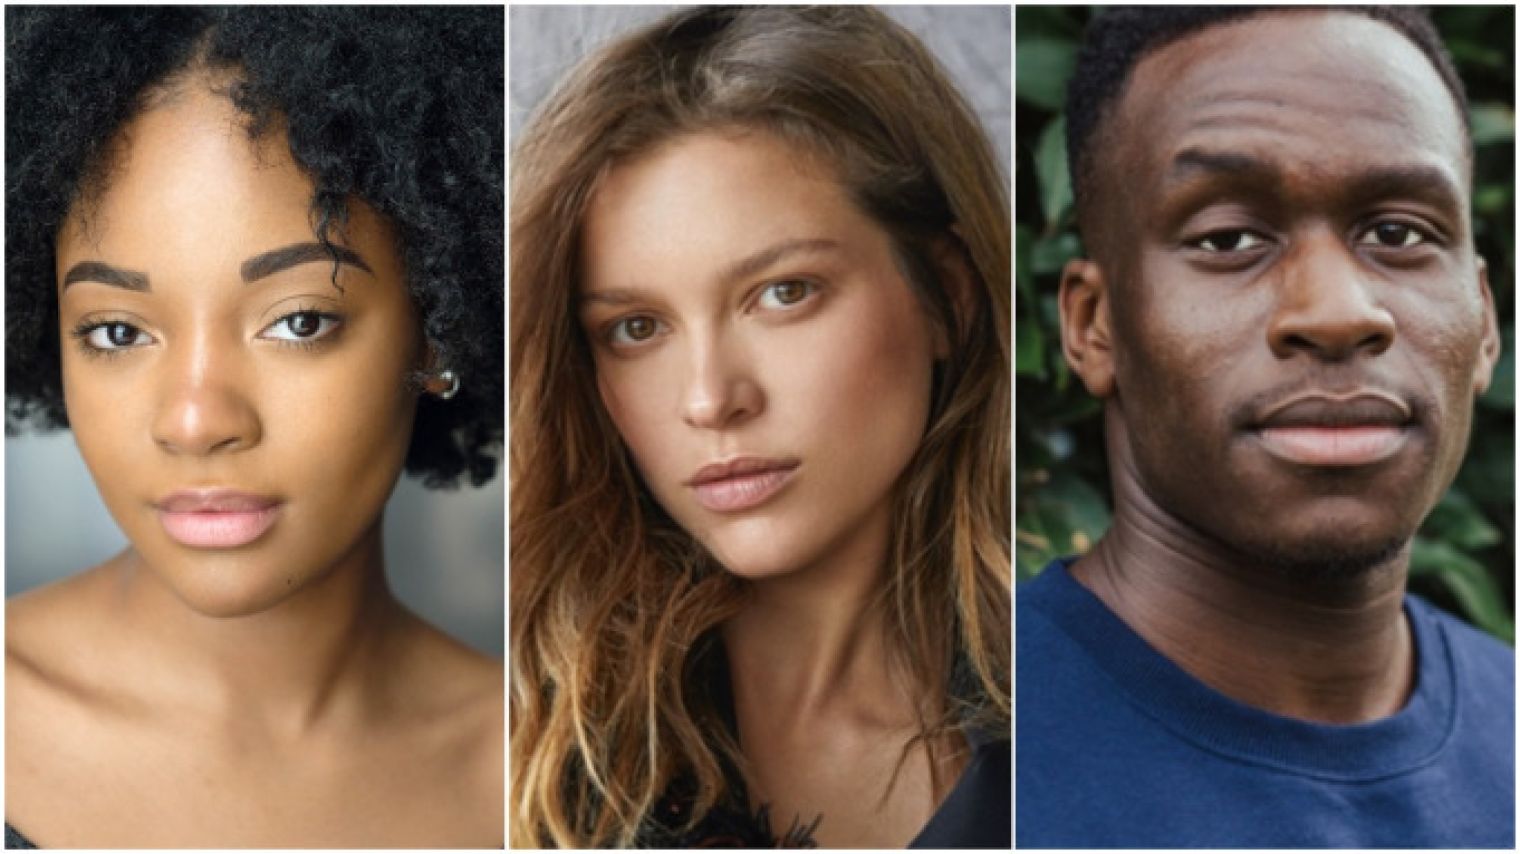 Sophie Cookson + Stephen Campbell Moore to star in new ITV Period Drama 'The Confessions of Frannie Langton'